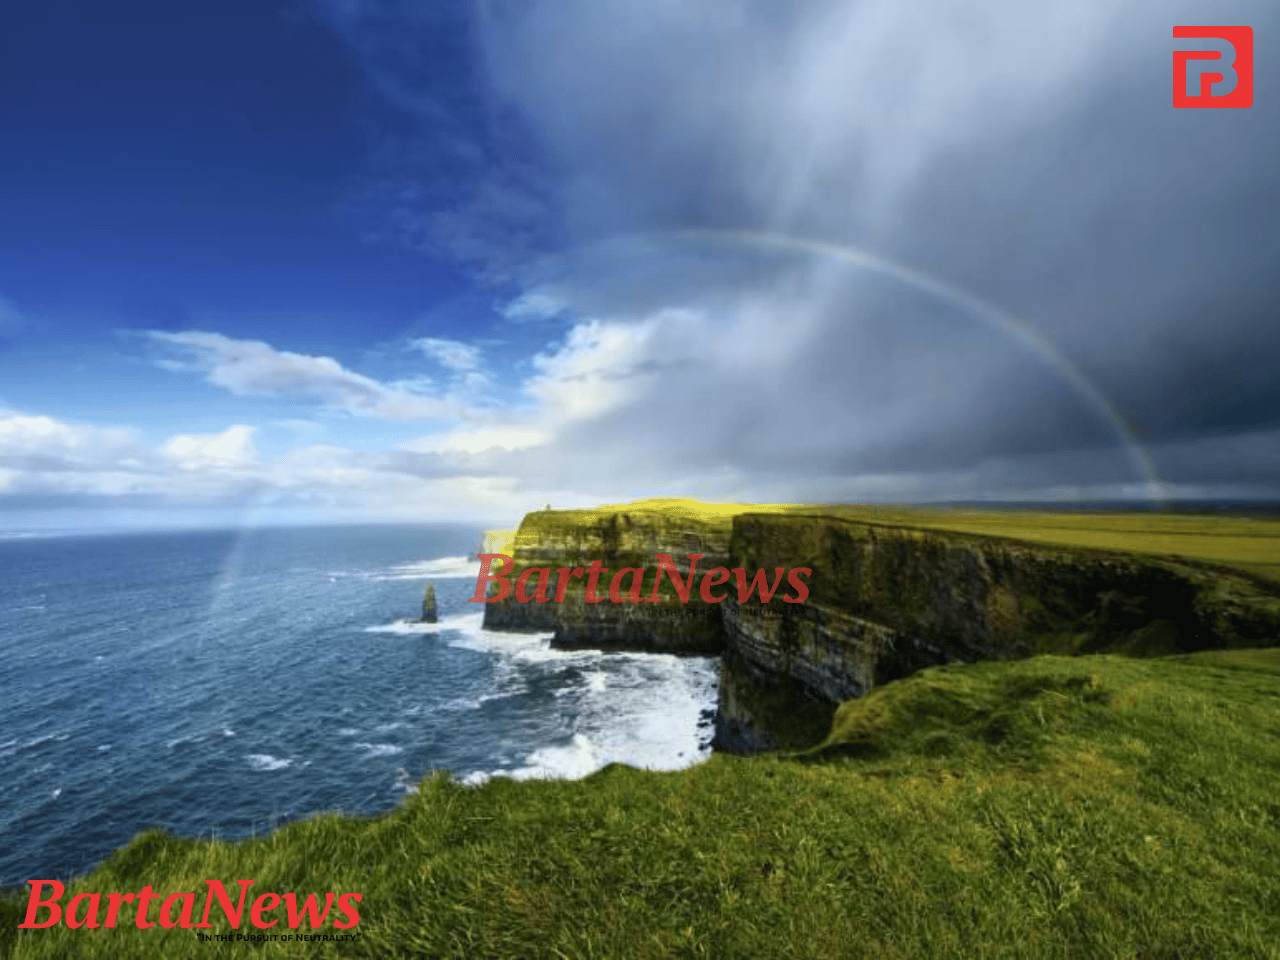 Cliffs of Moher: News of Exceeding 1 Million Visitors Every Year Since 2014